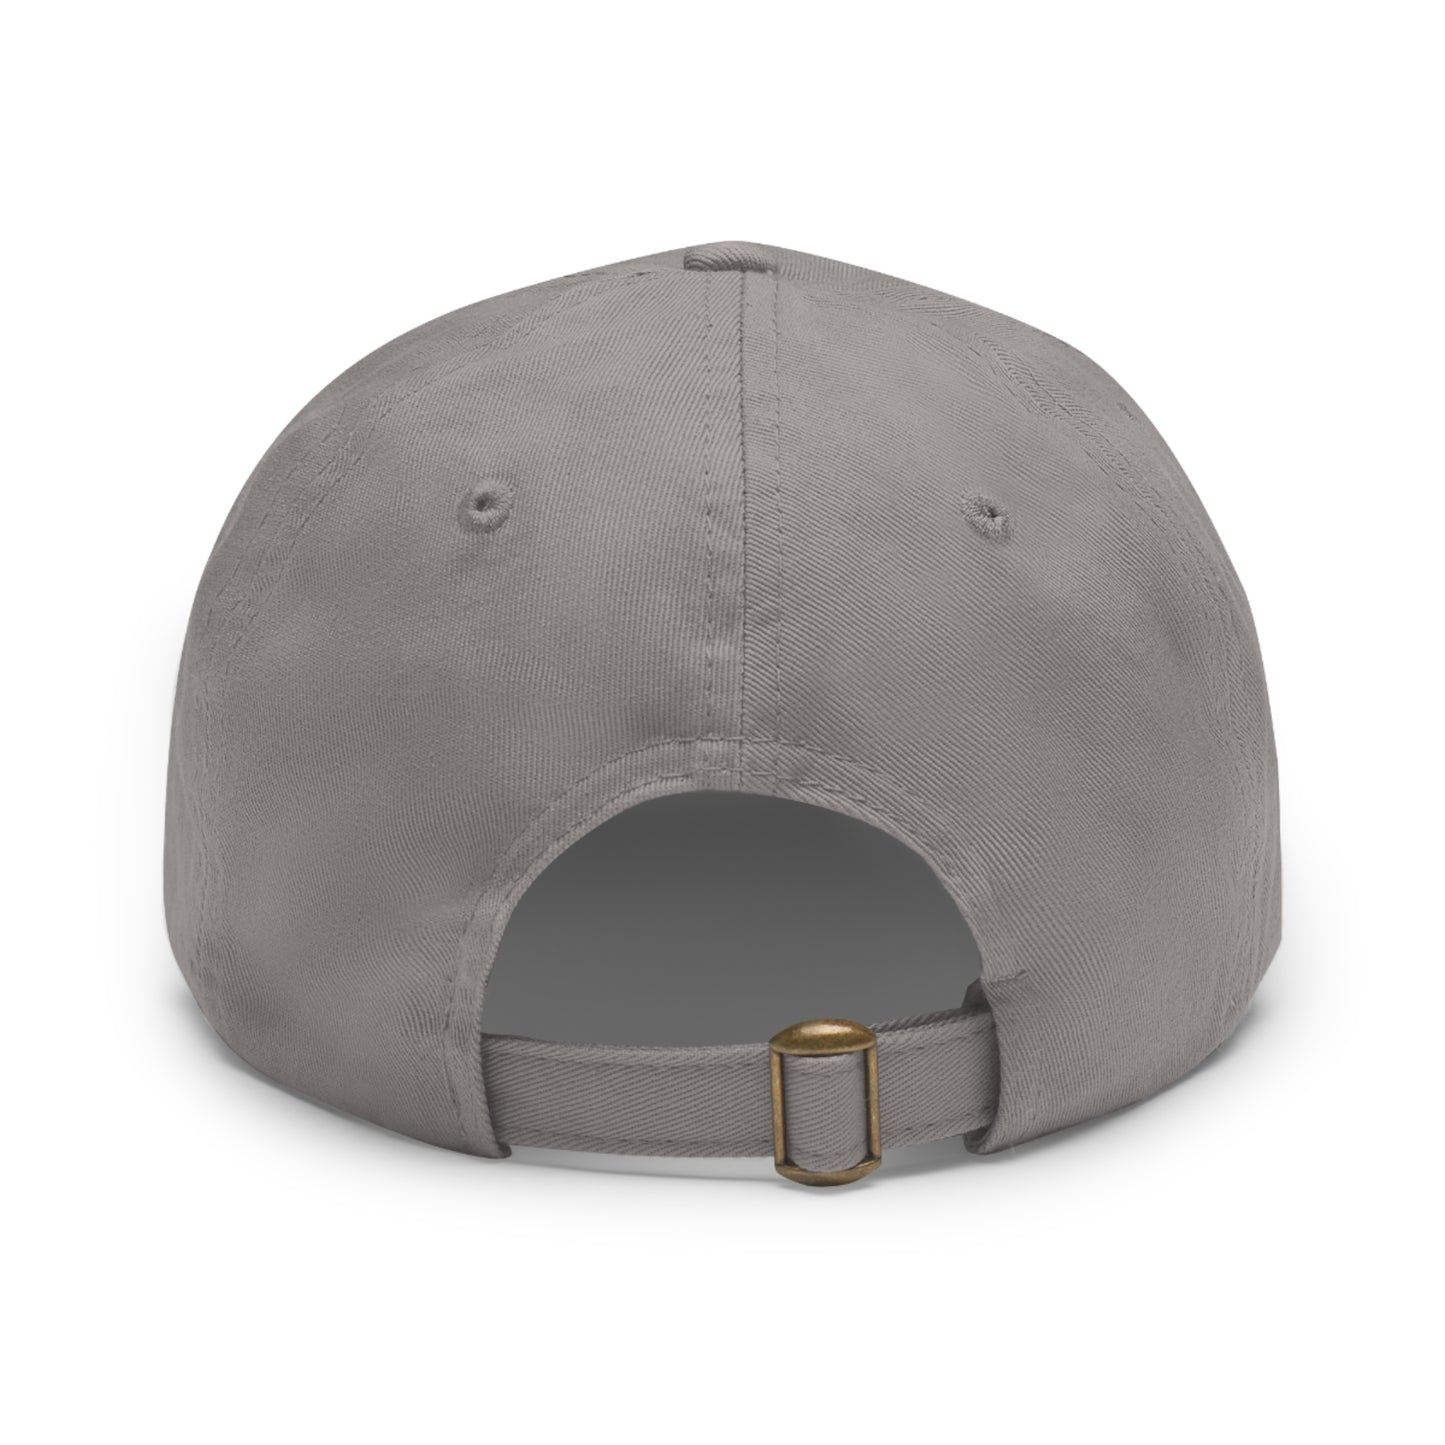 LOEB'S Mountain Hop Hat with Leather Patch